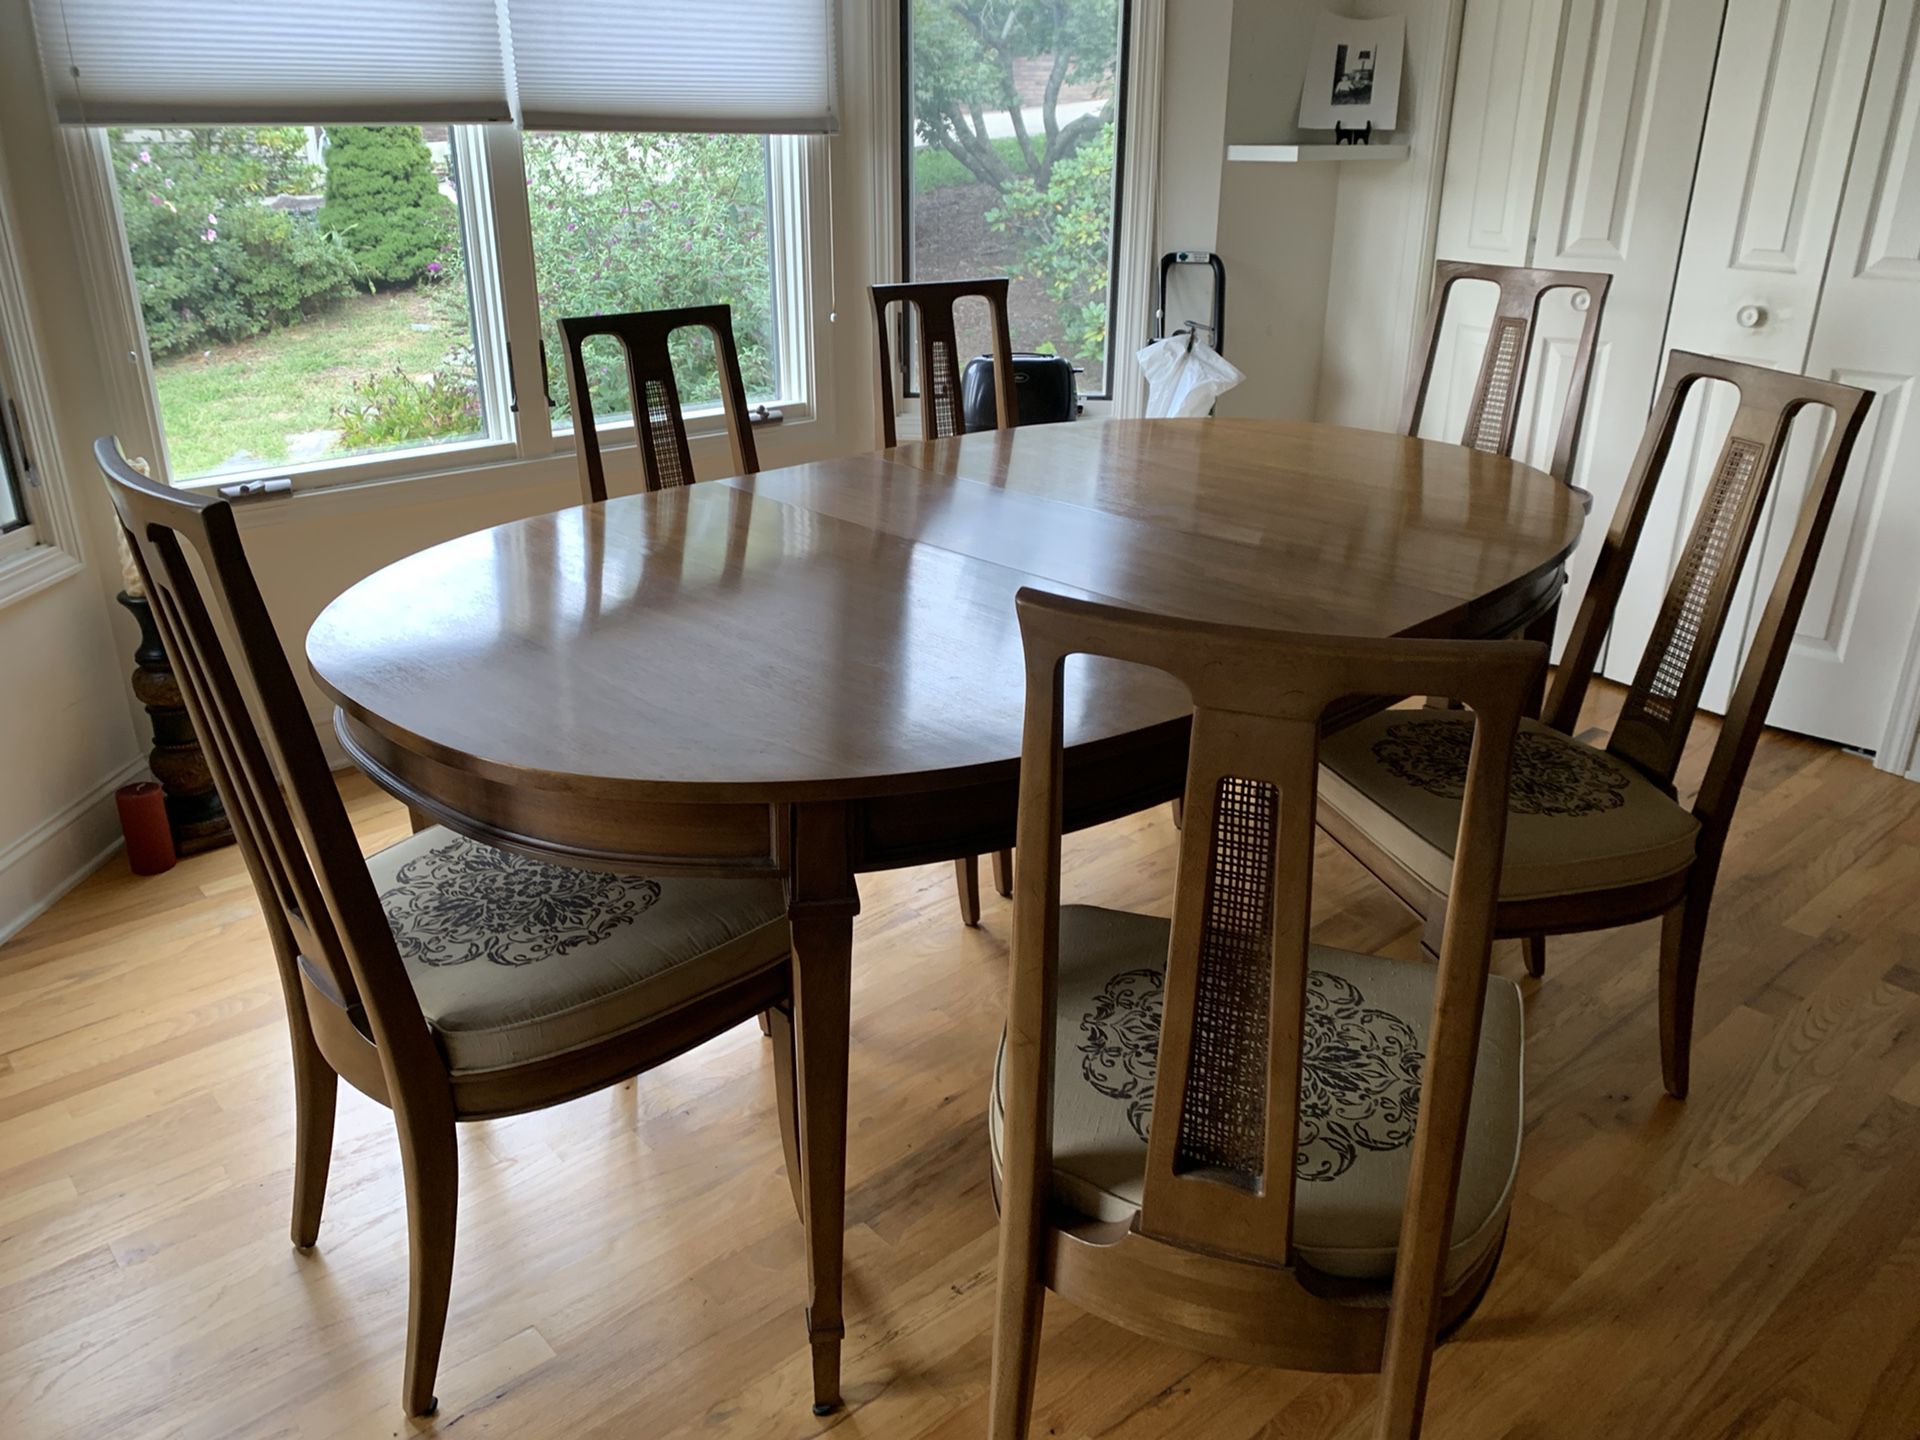 Dining Room Table And Chairs With Matching China Cabinet. 